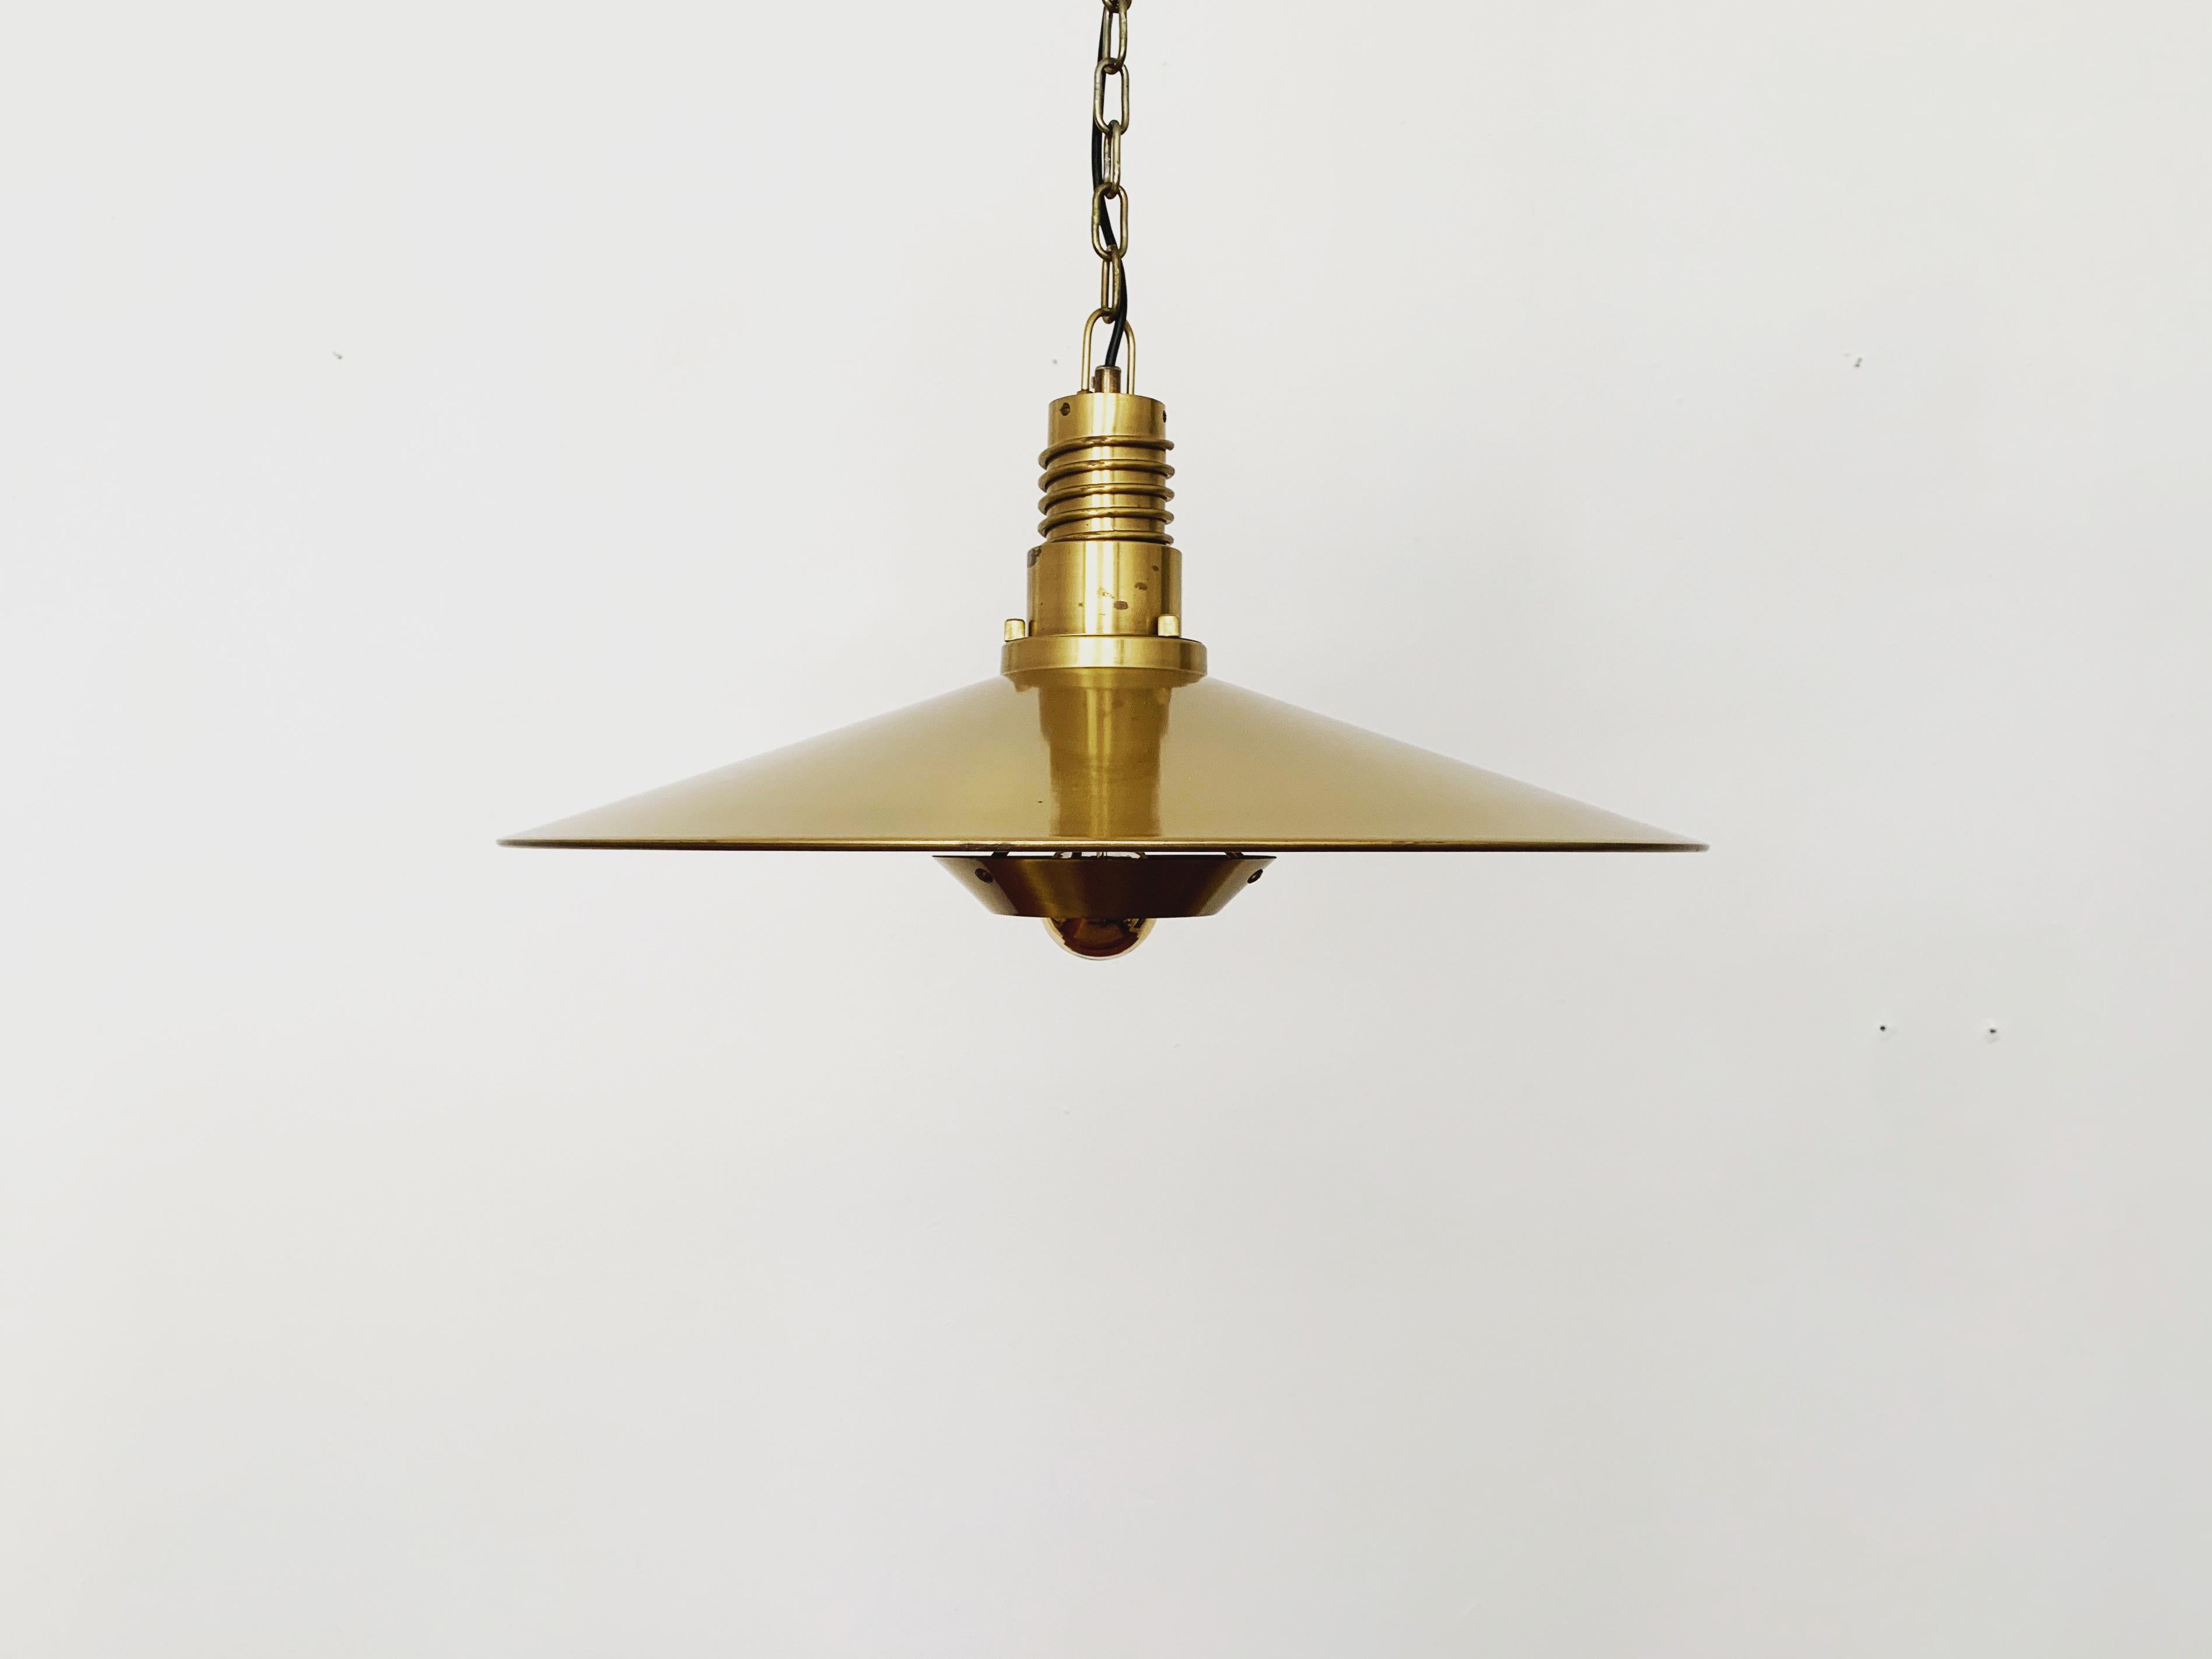 Very nice Danish brass pendant lamp from the 1960s.
The lighting effect of the lamp is extremely beautiful. The design and the very beautiful details create a very noble and pleasant light.
The lamp creates a very cozy atmosphere and is of very